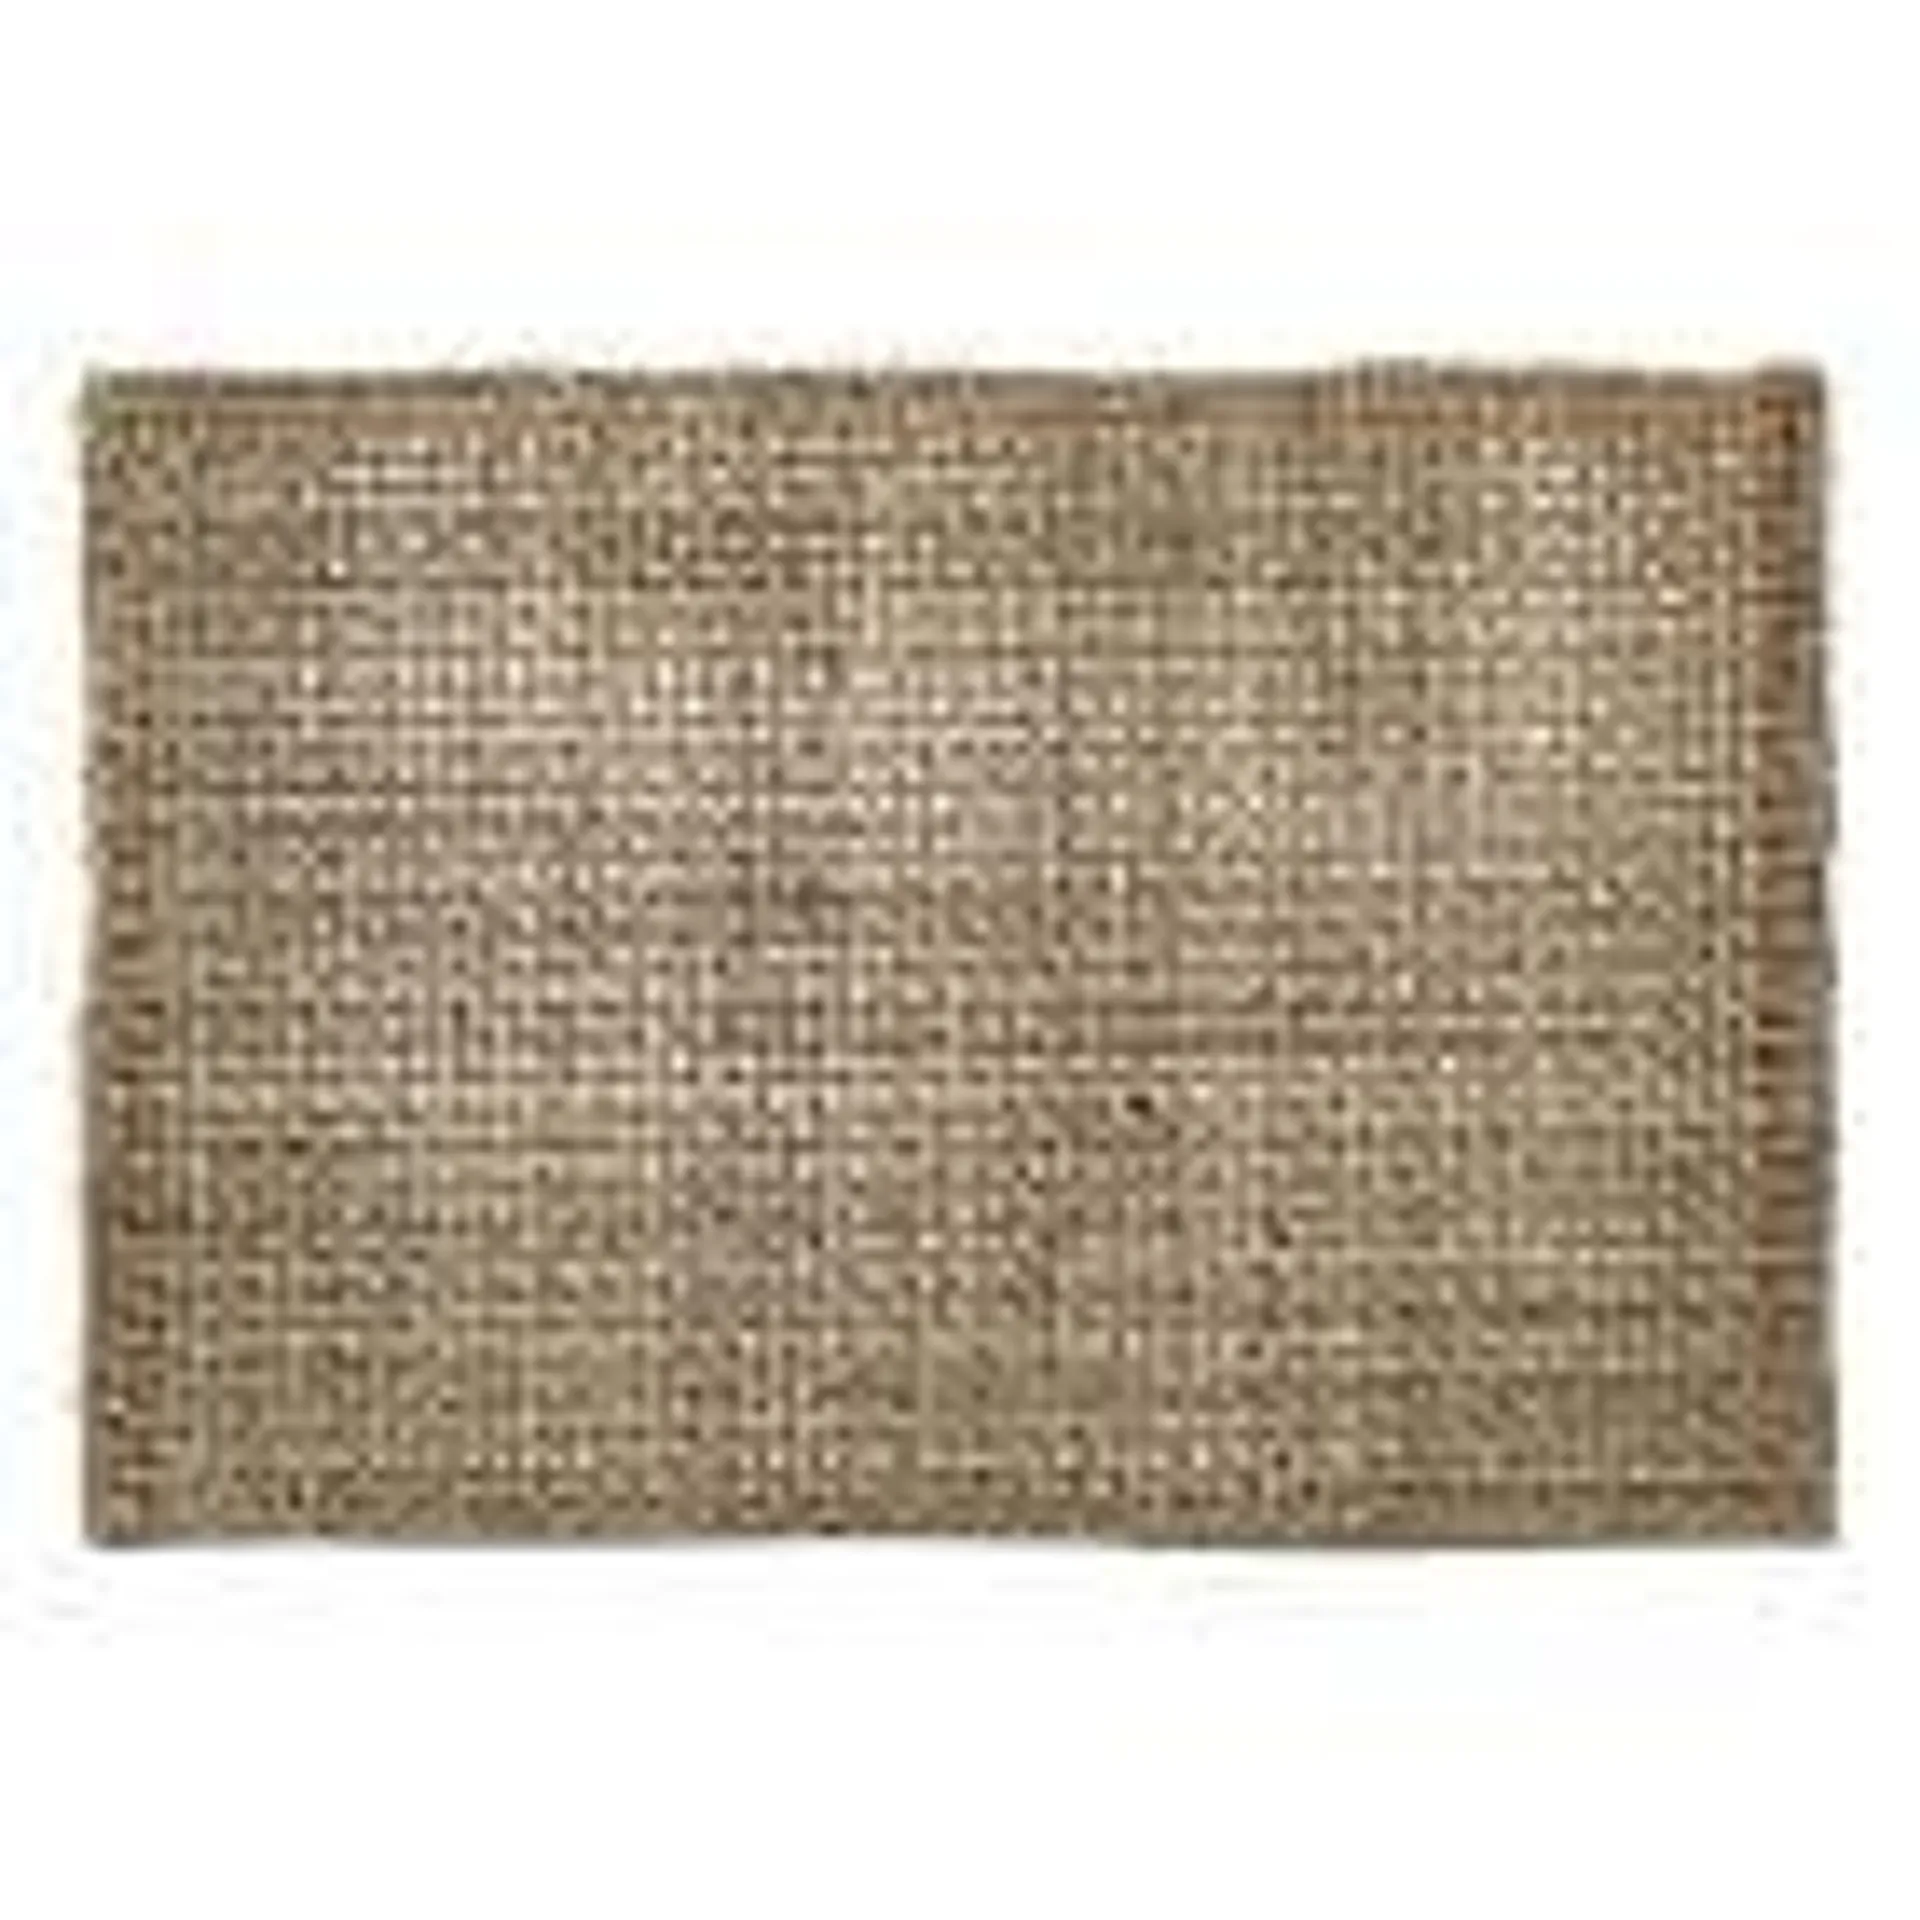 Handwoven Fishnet Abaca Placemats (Set of 2)